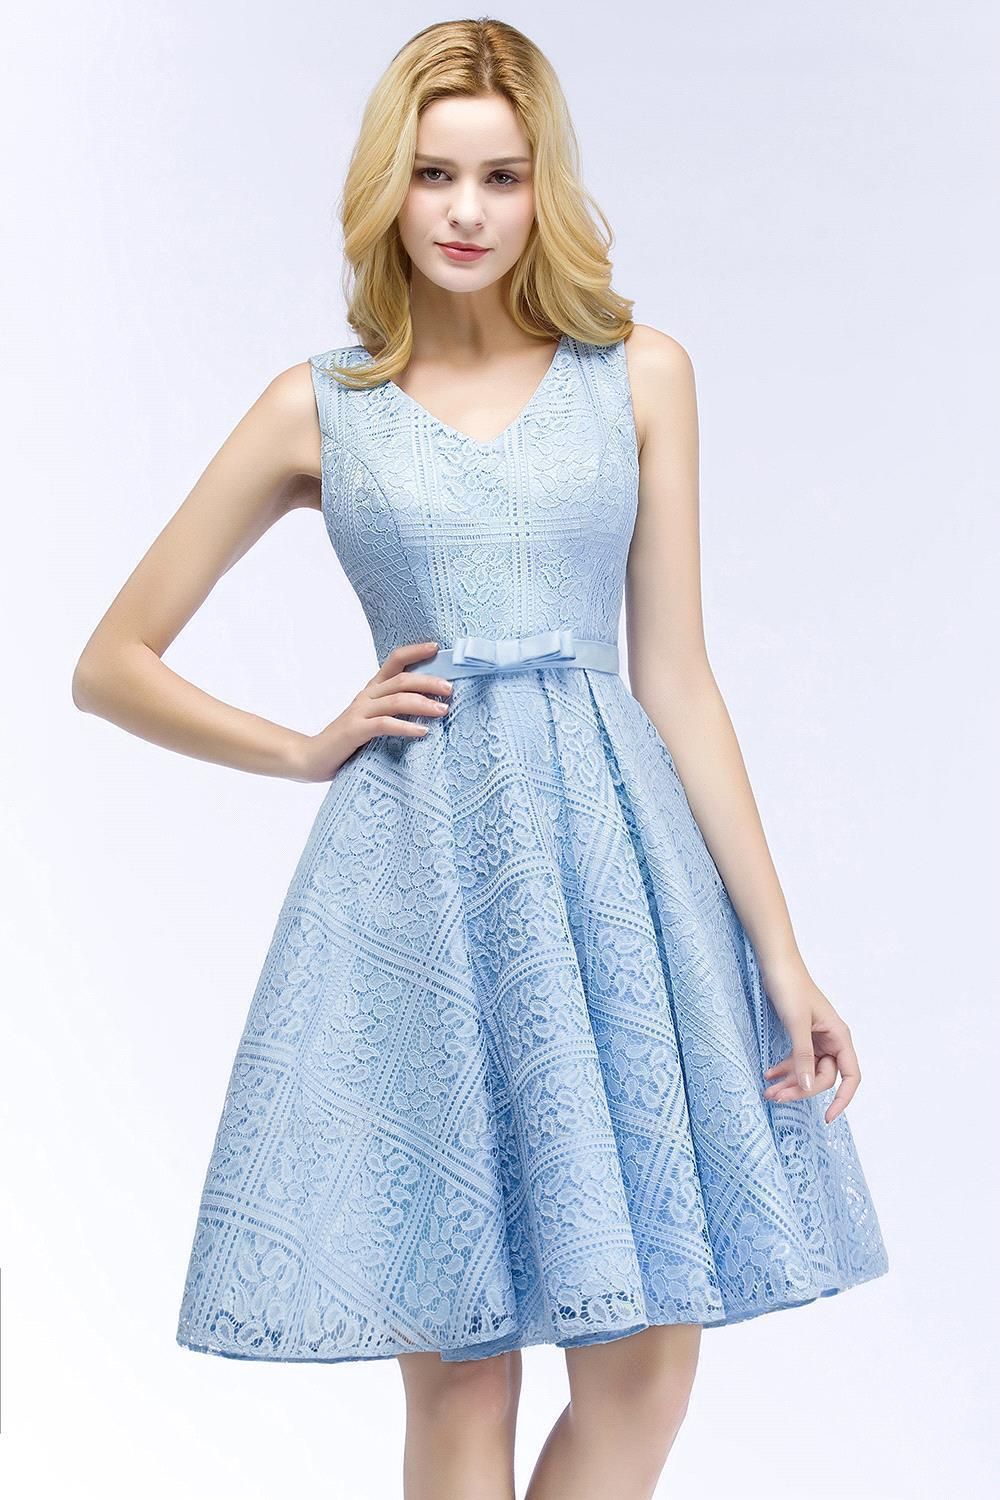 BMbridal Lovely A-line Lace Knee-Length Homecoming Dress